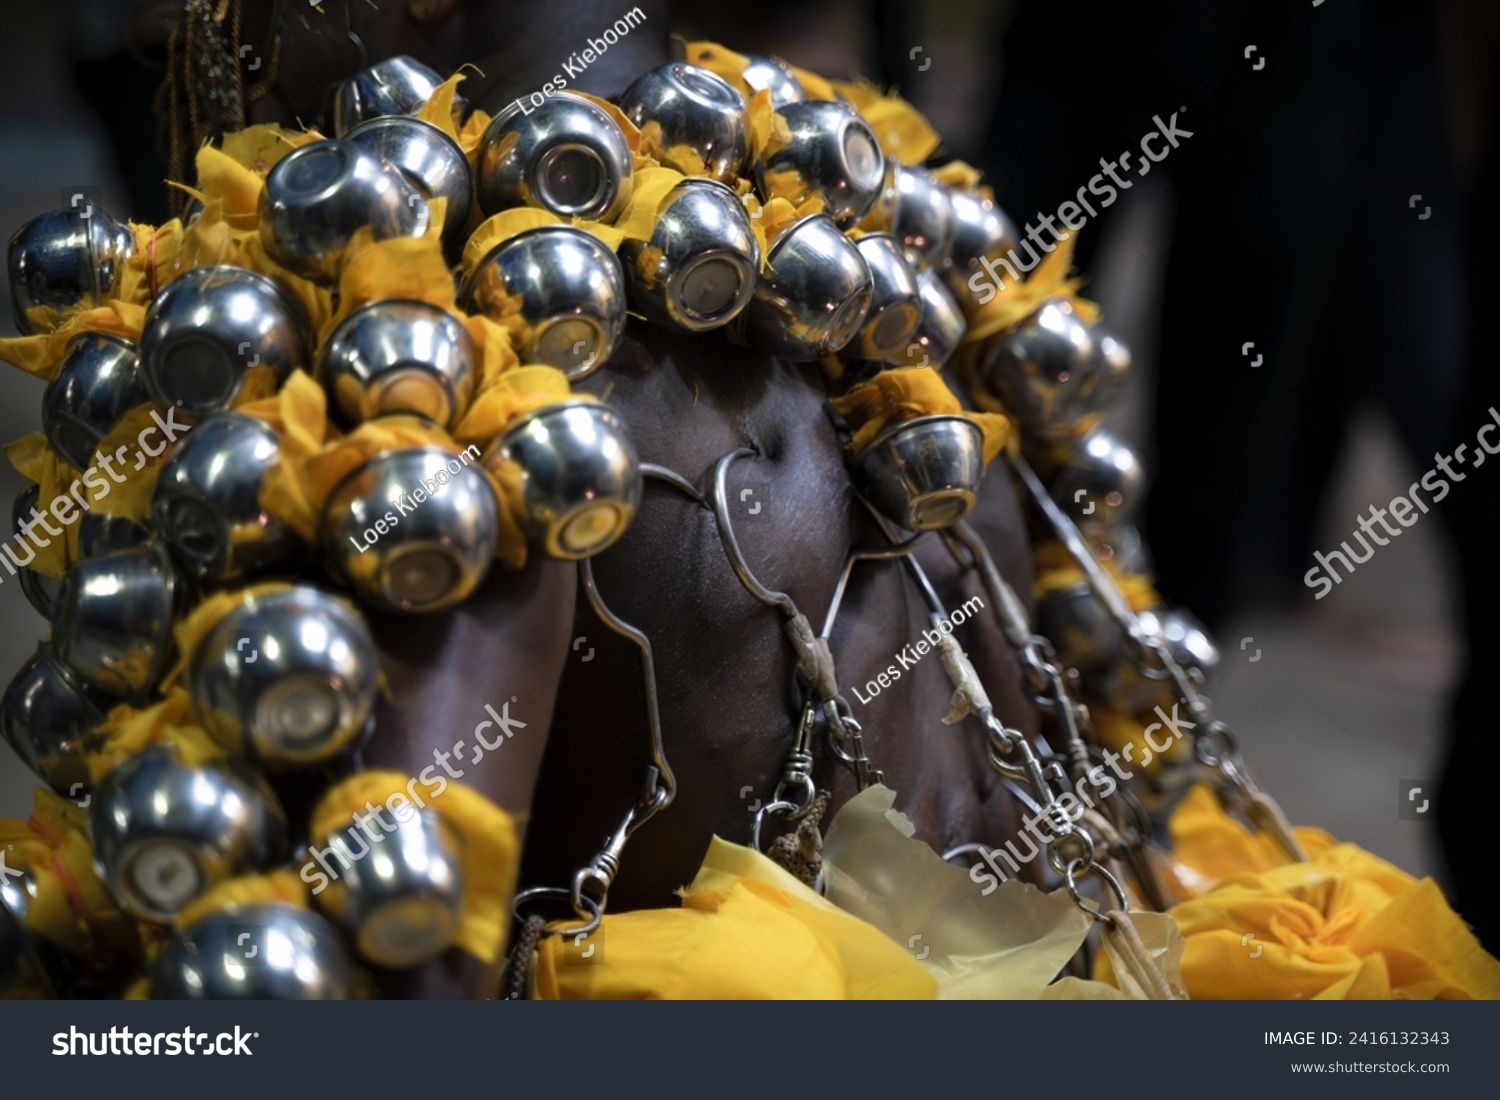 Georgetown, Penang, Malaysia - February 05, 2023: Metal pots with offerings hooked on the back of a Hindu devotee at Thaipusam #2416132343